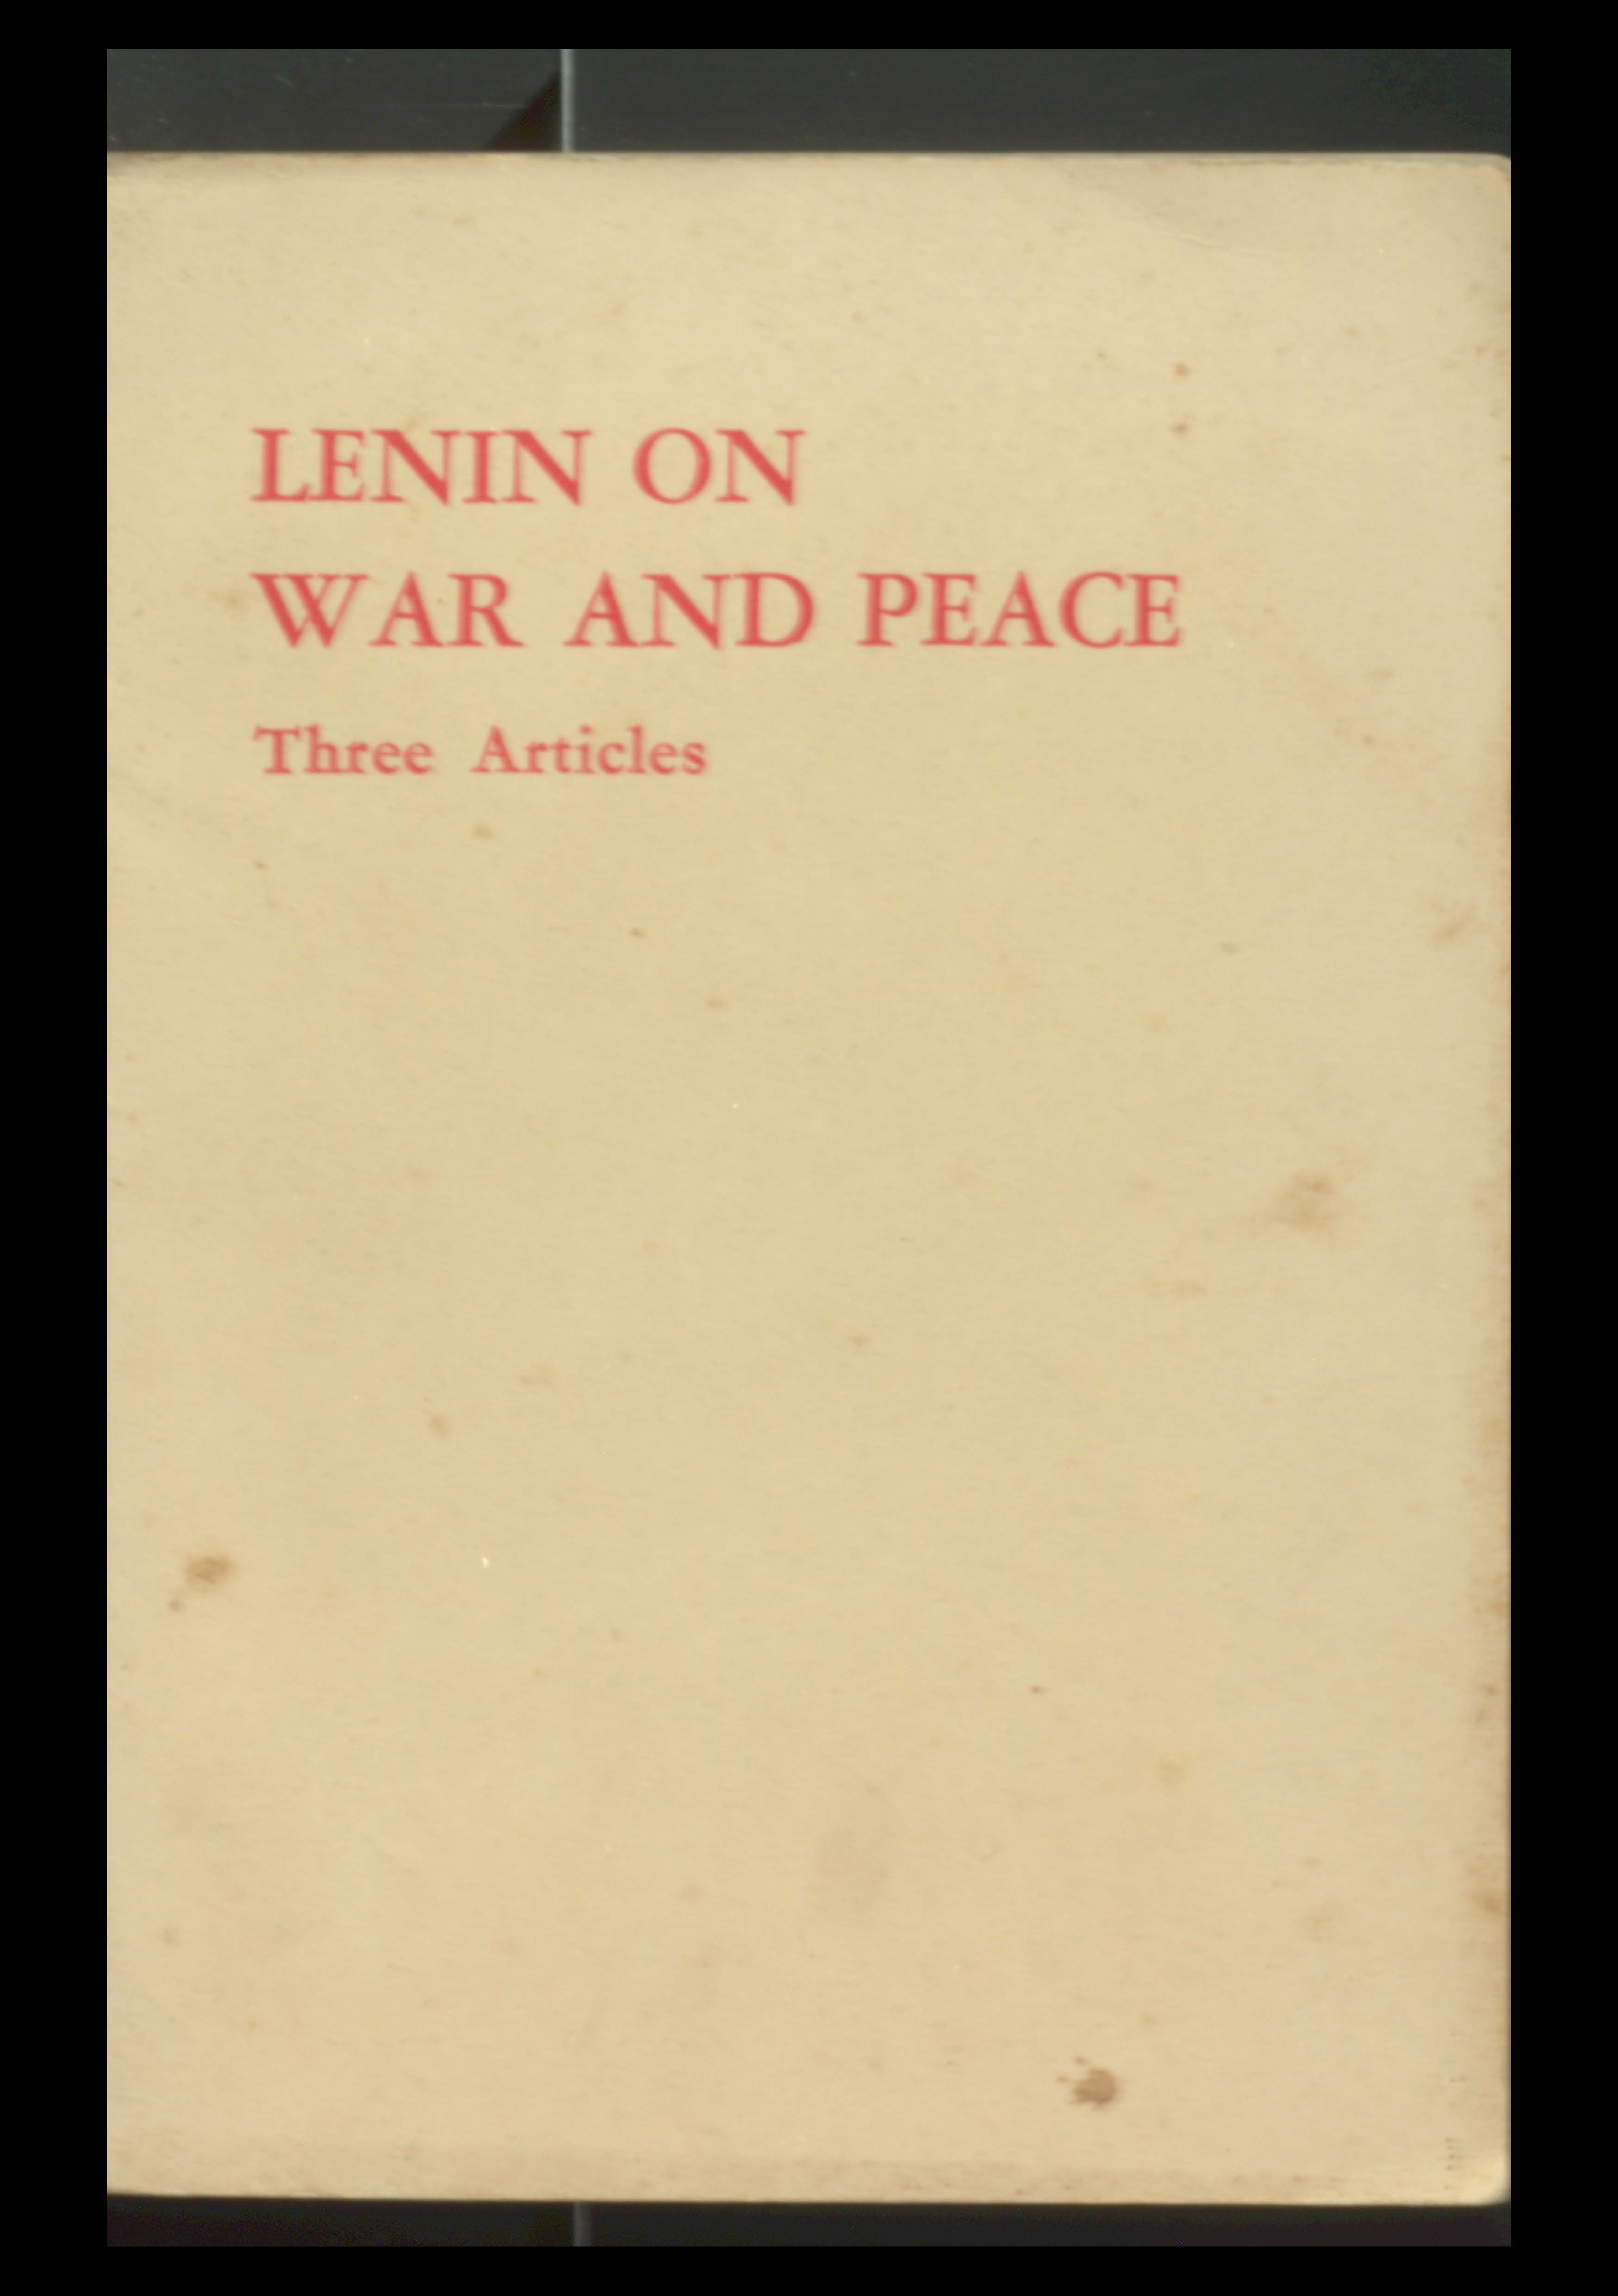 Lenin On War And Peace (Three Articles)